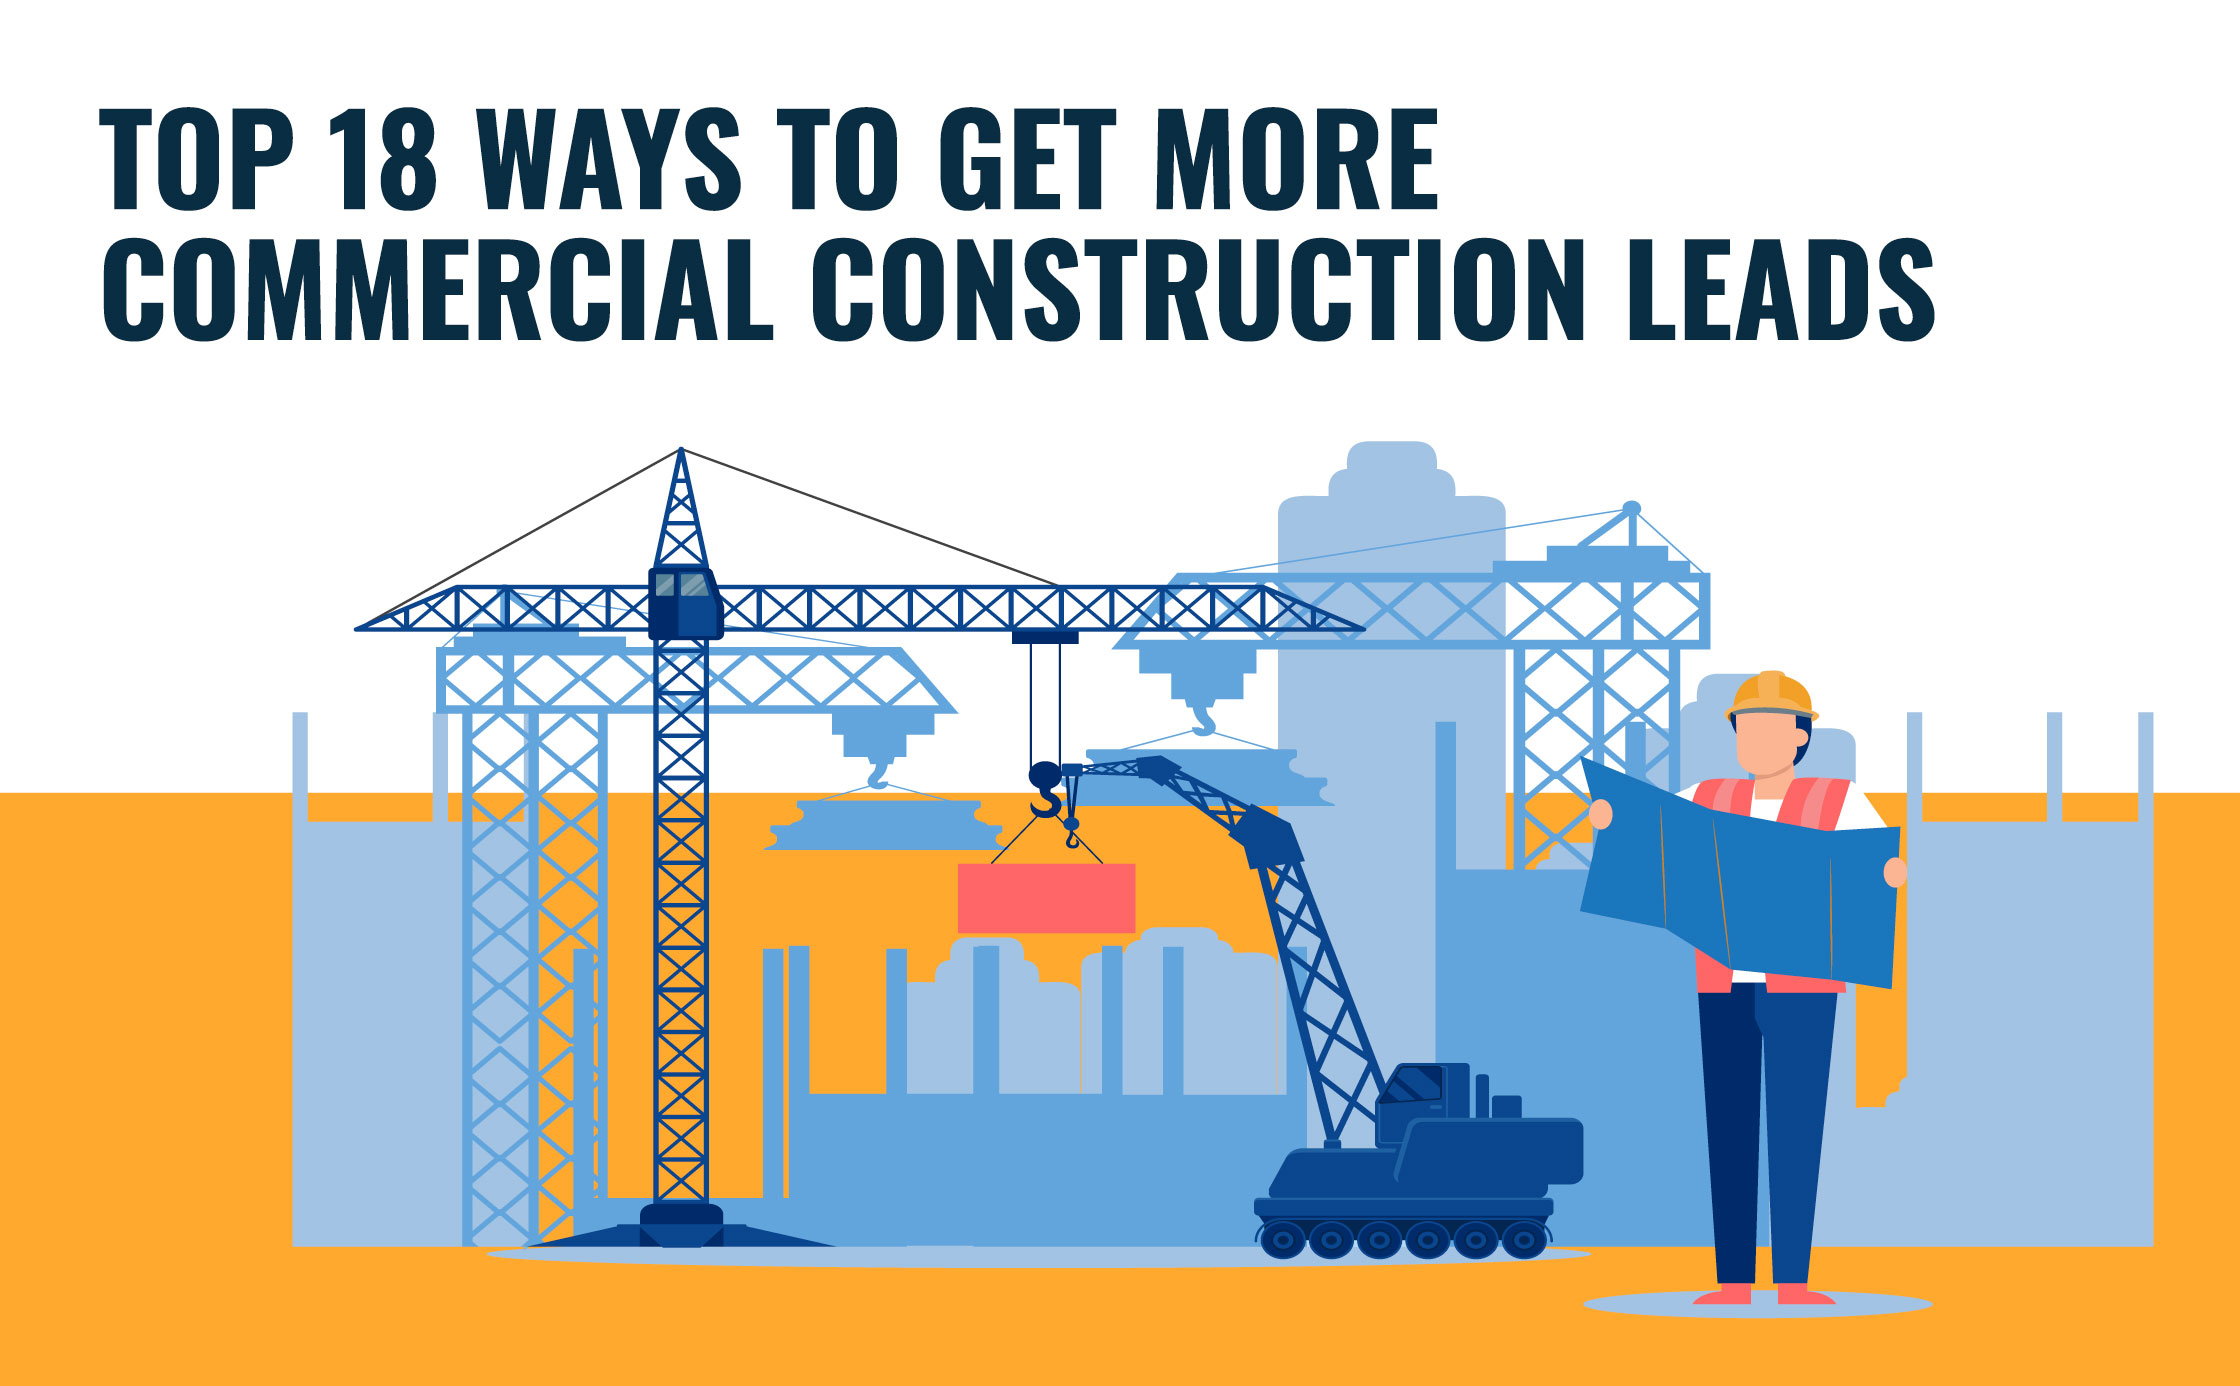 Top 18 Ways to Get More Commercial Construction Leads